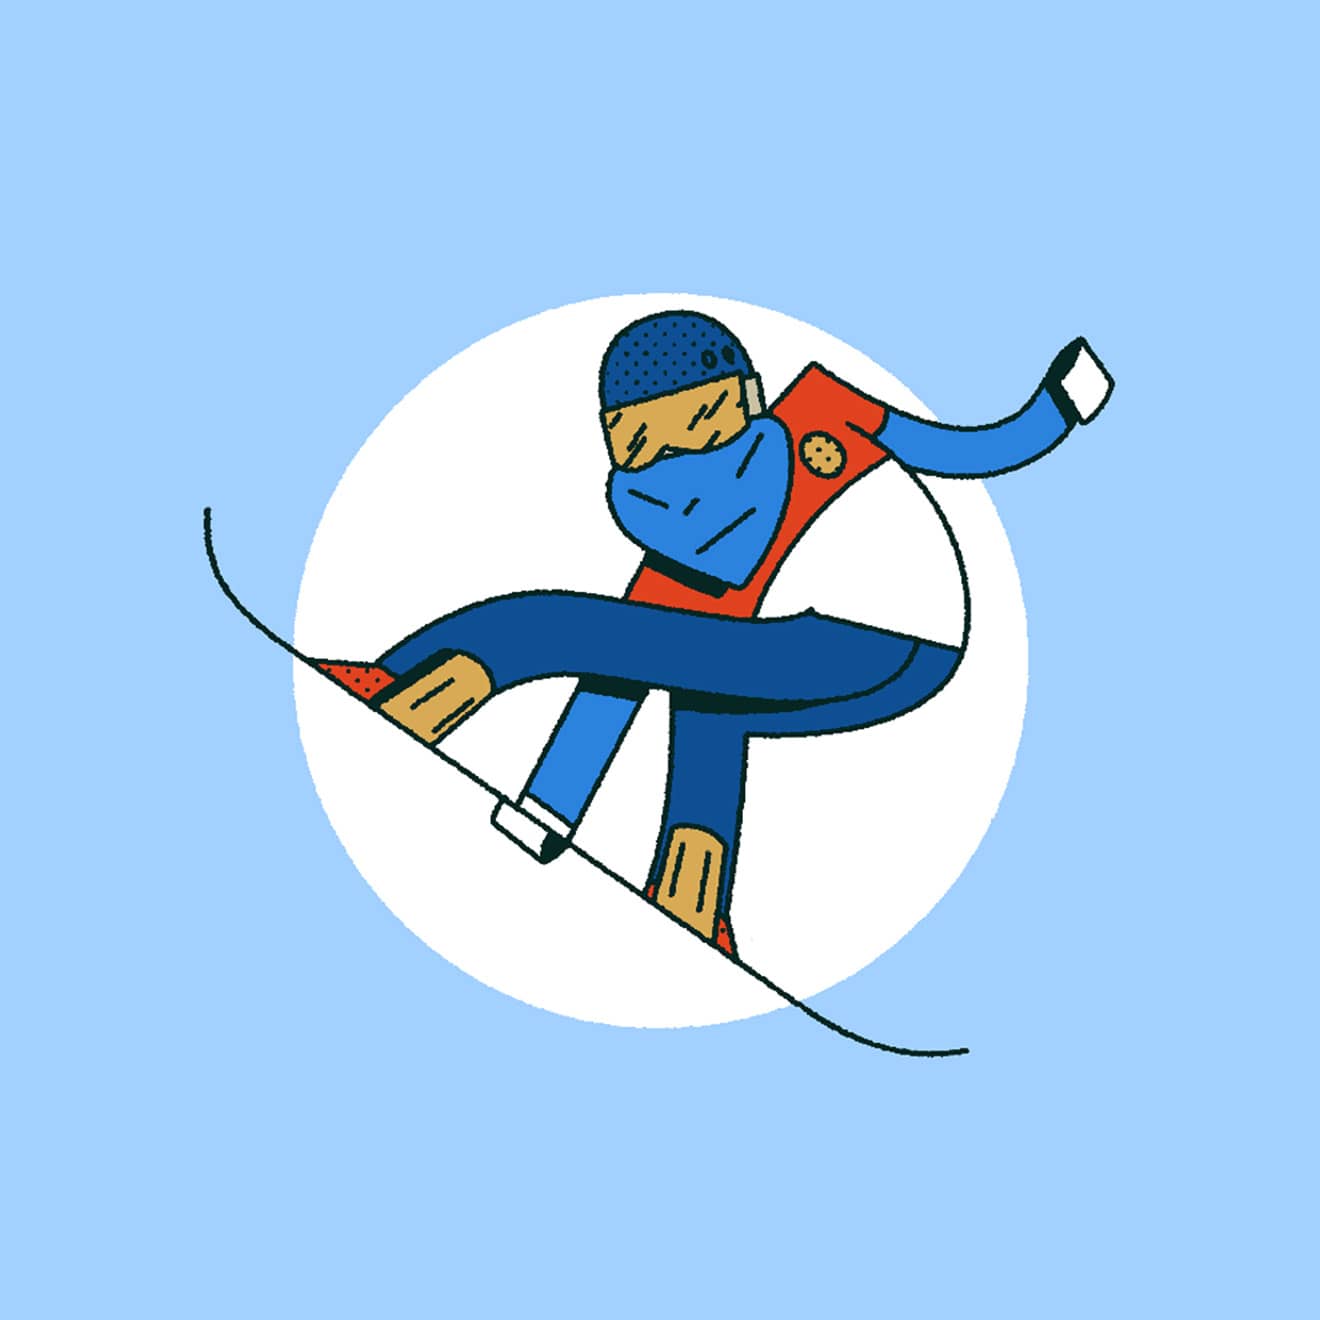 Blue, Red, White & Beige illustration of a person snowboarding